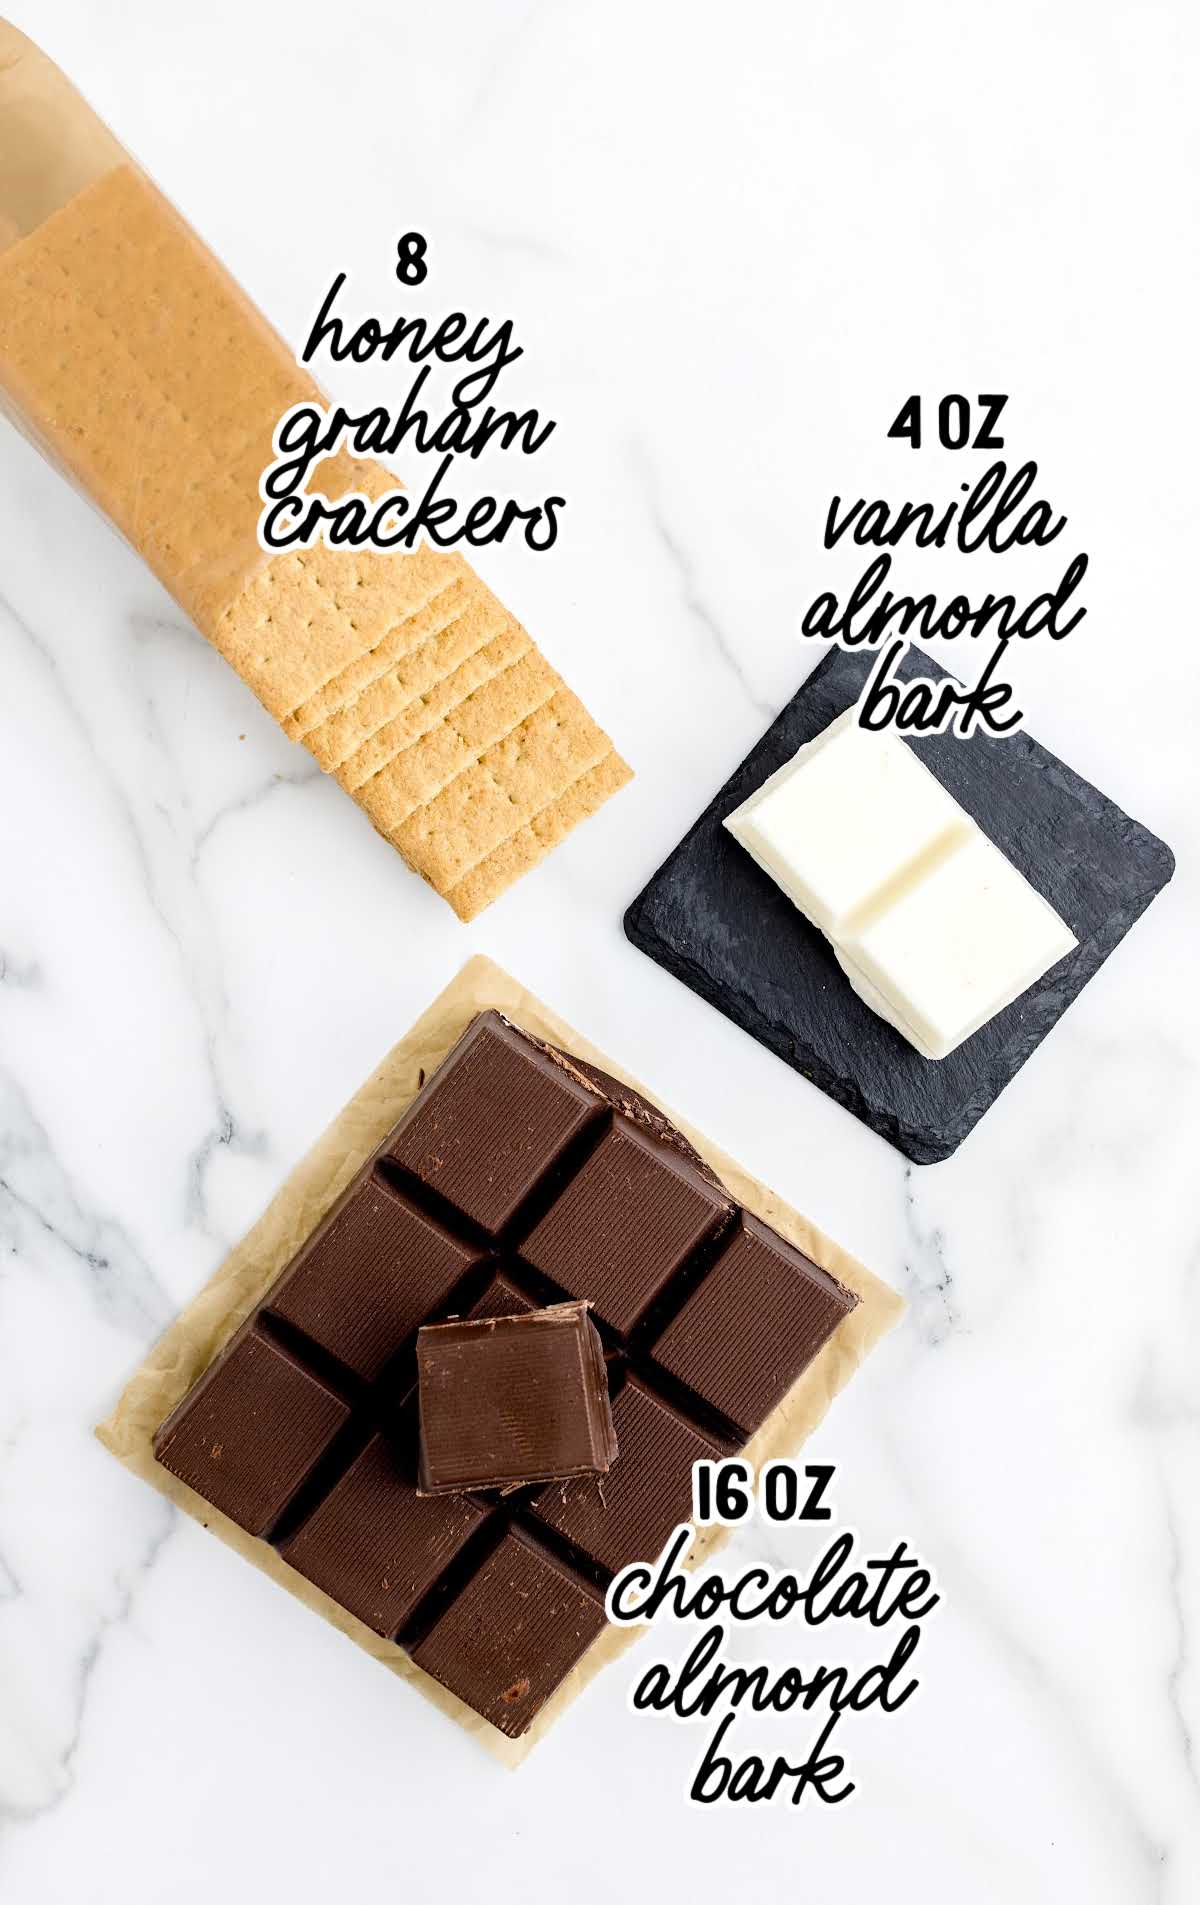 Chocolate Covered Graham Crackers raw ingredients that are labeled